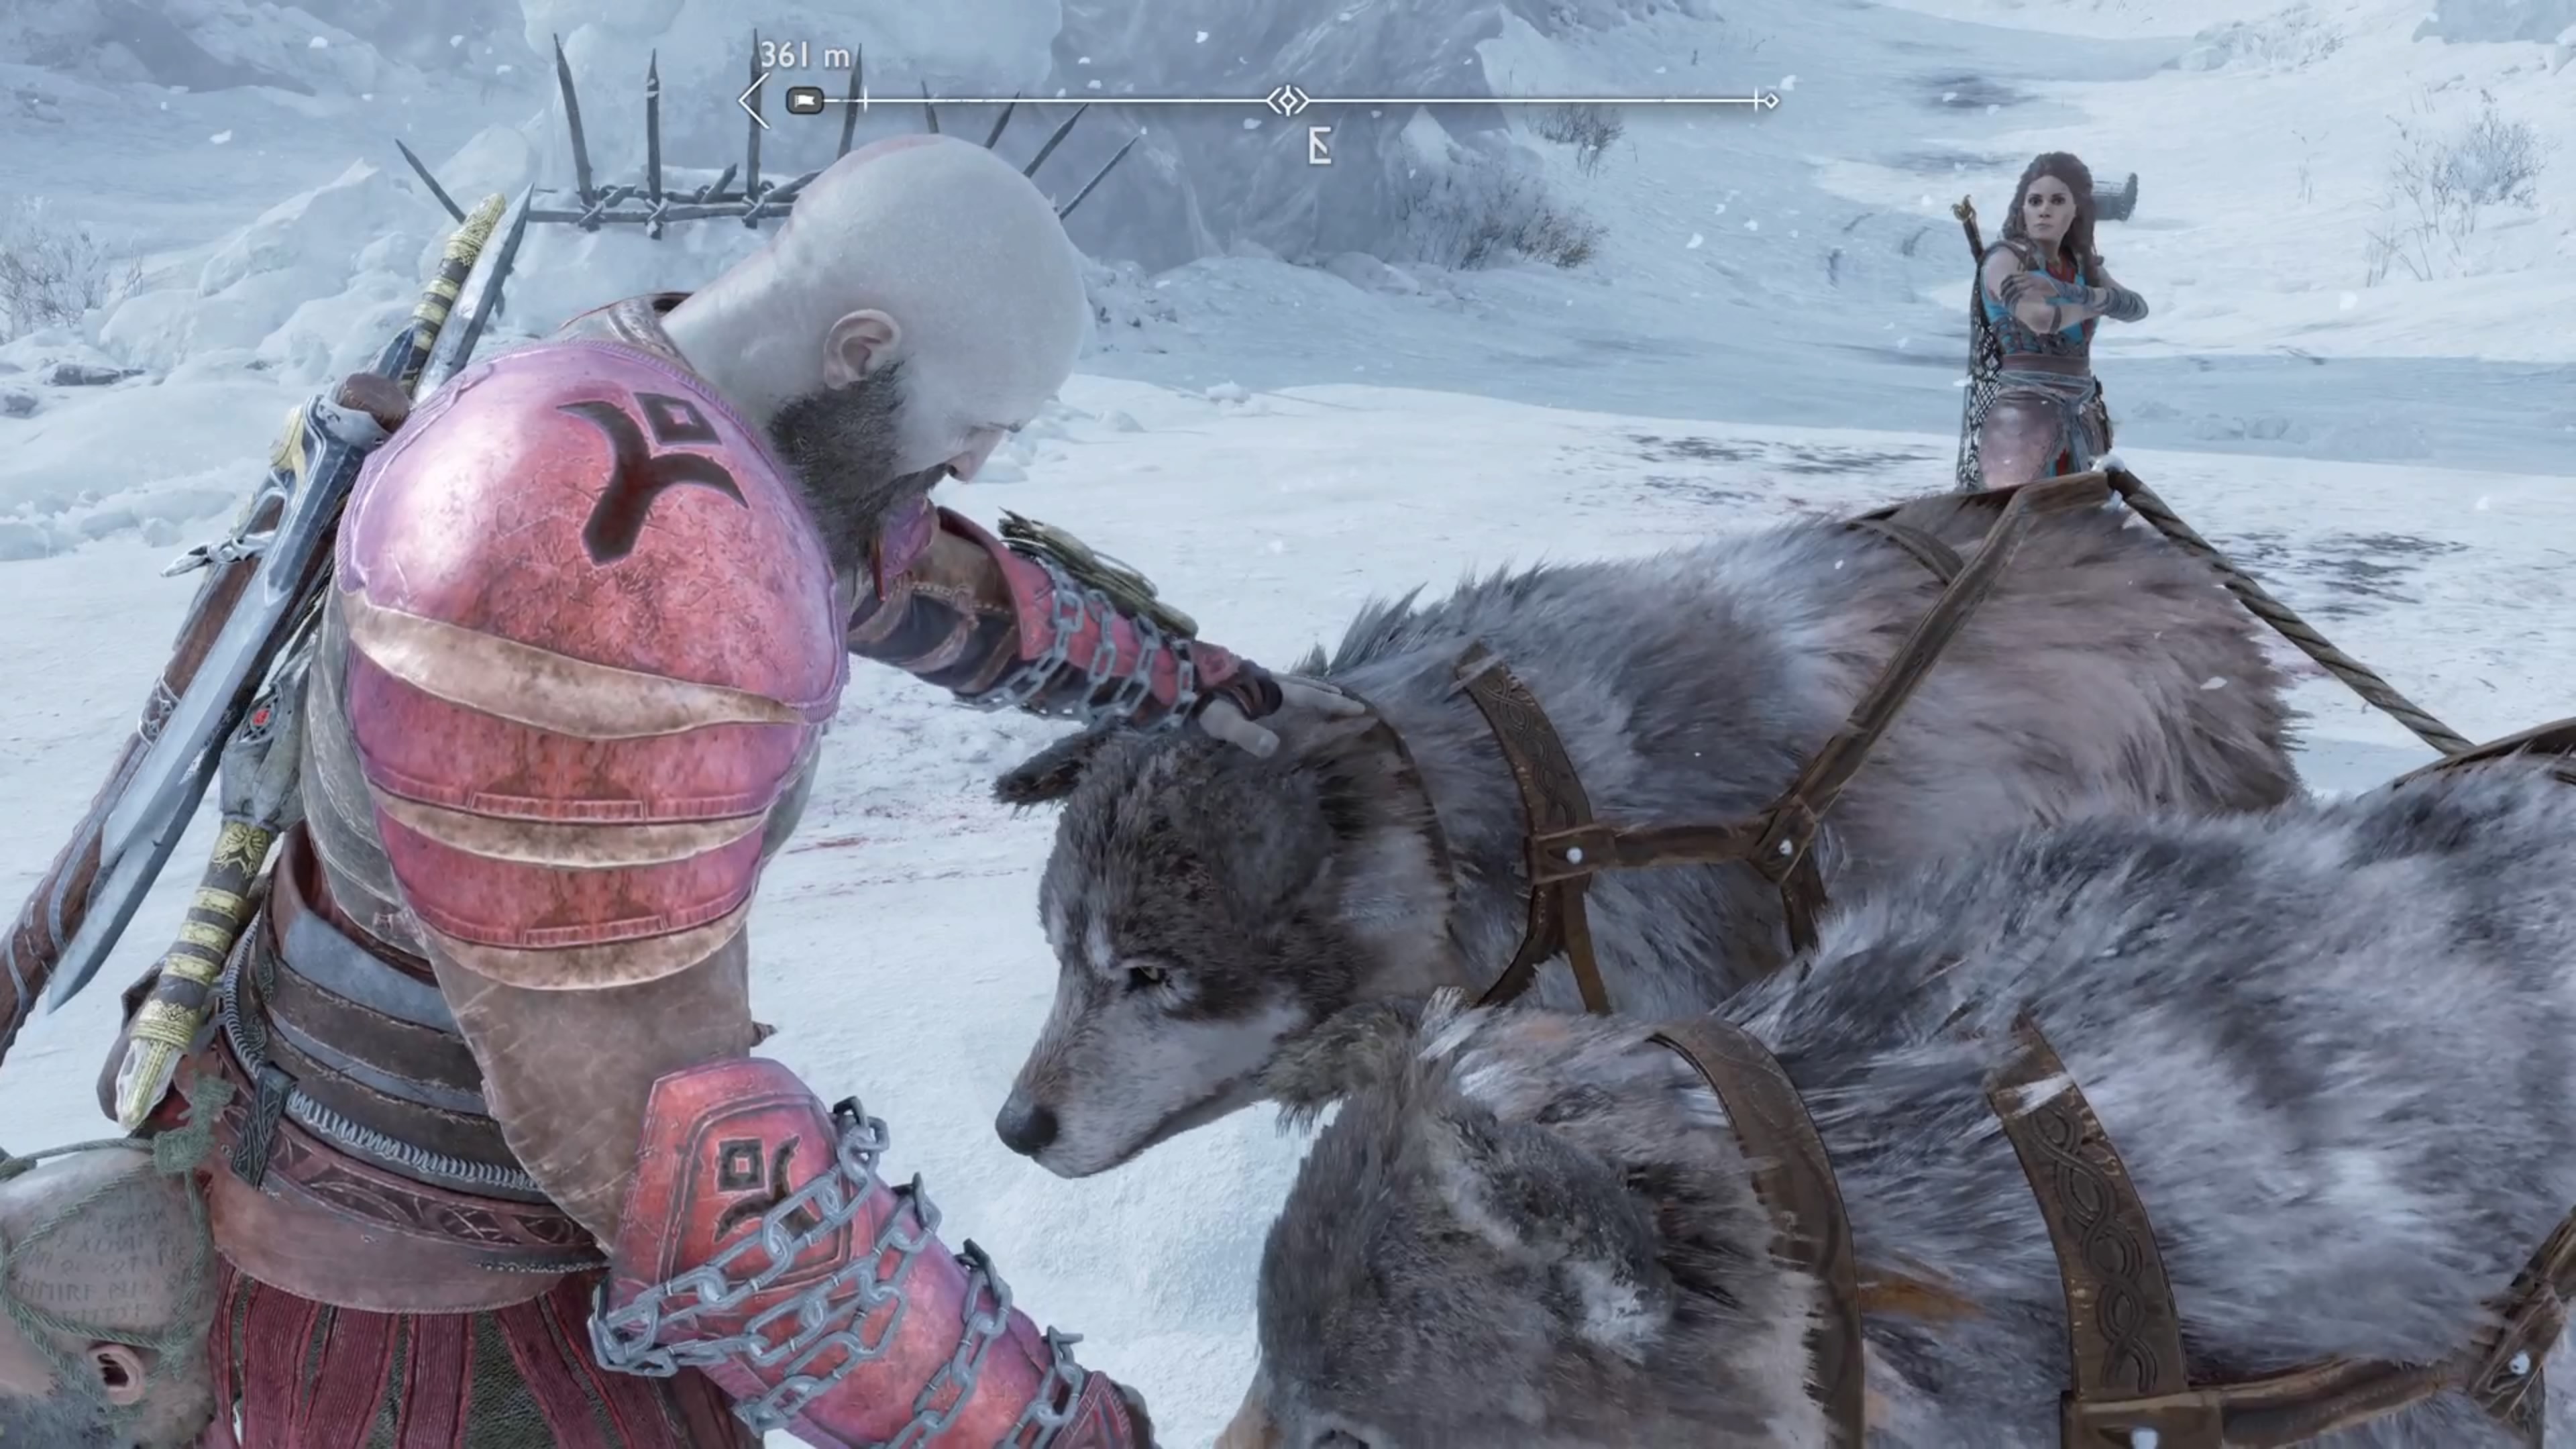 Return to the wolves after beating the boss for a touching moment